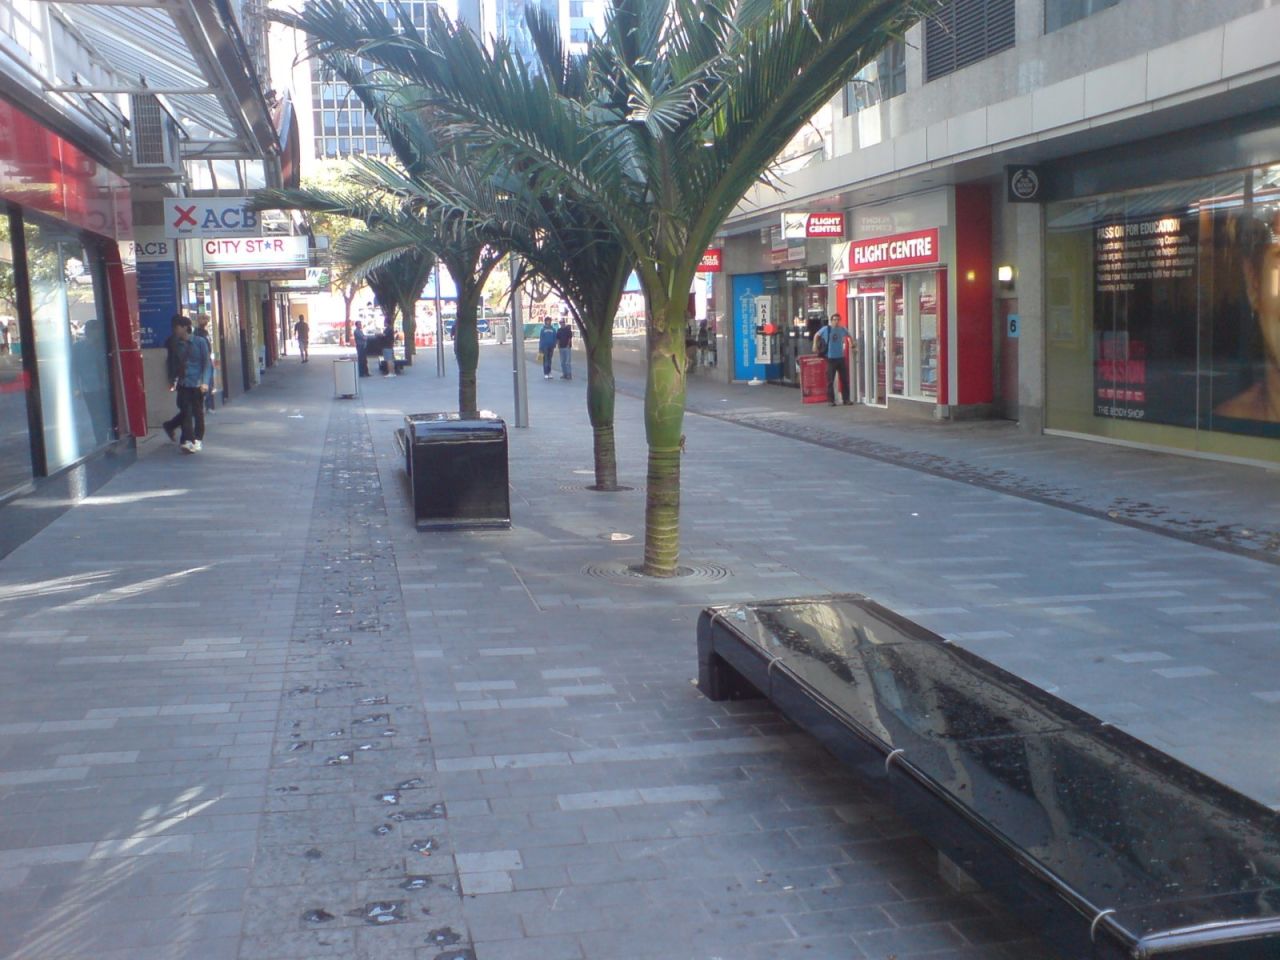 Darby Street is one of six new shared spaces opened in Auckland New Zealand since 2011.